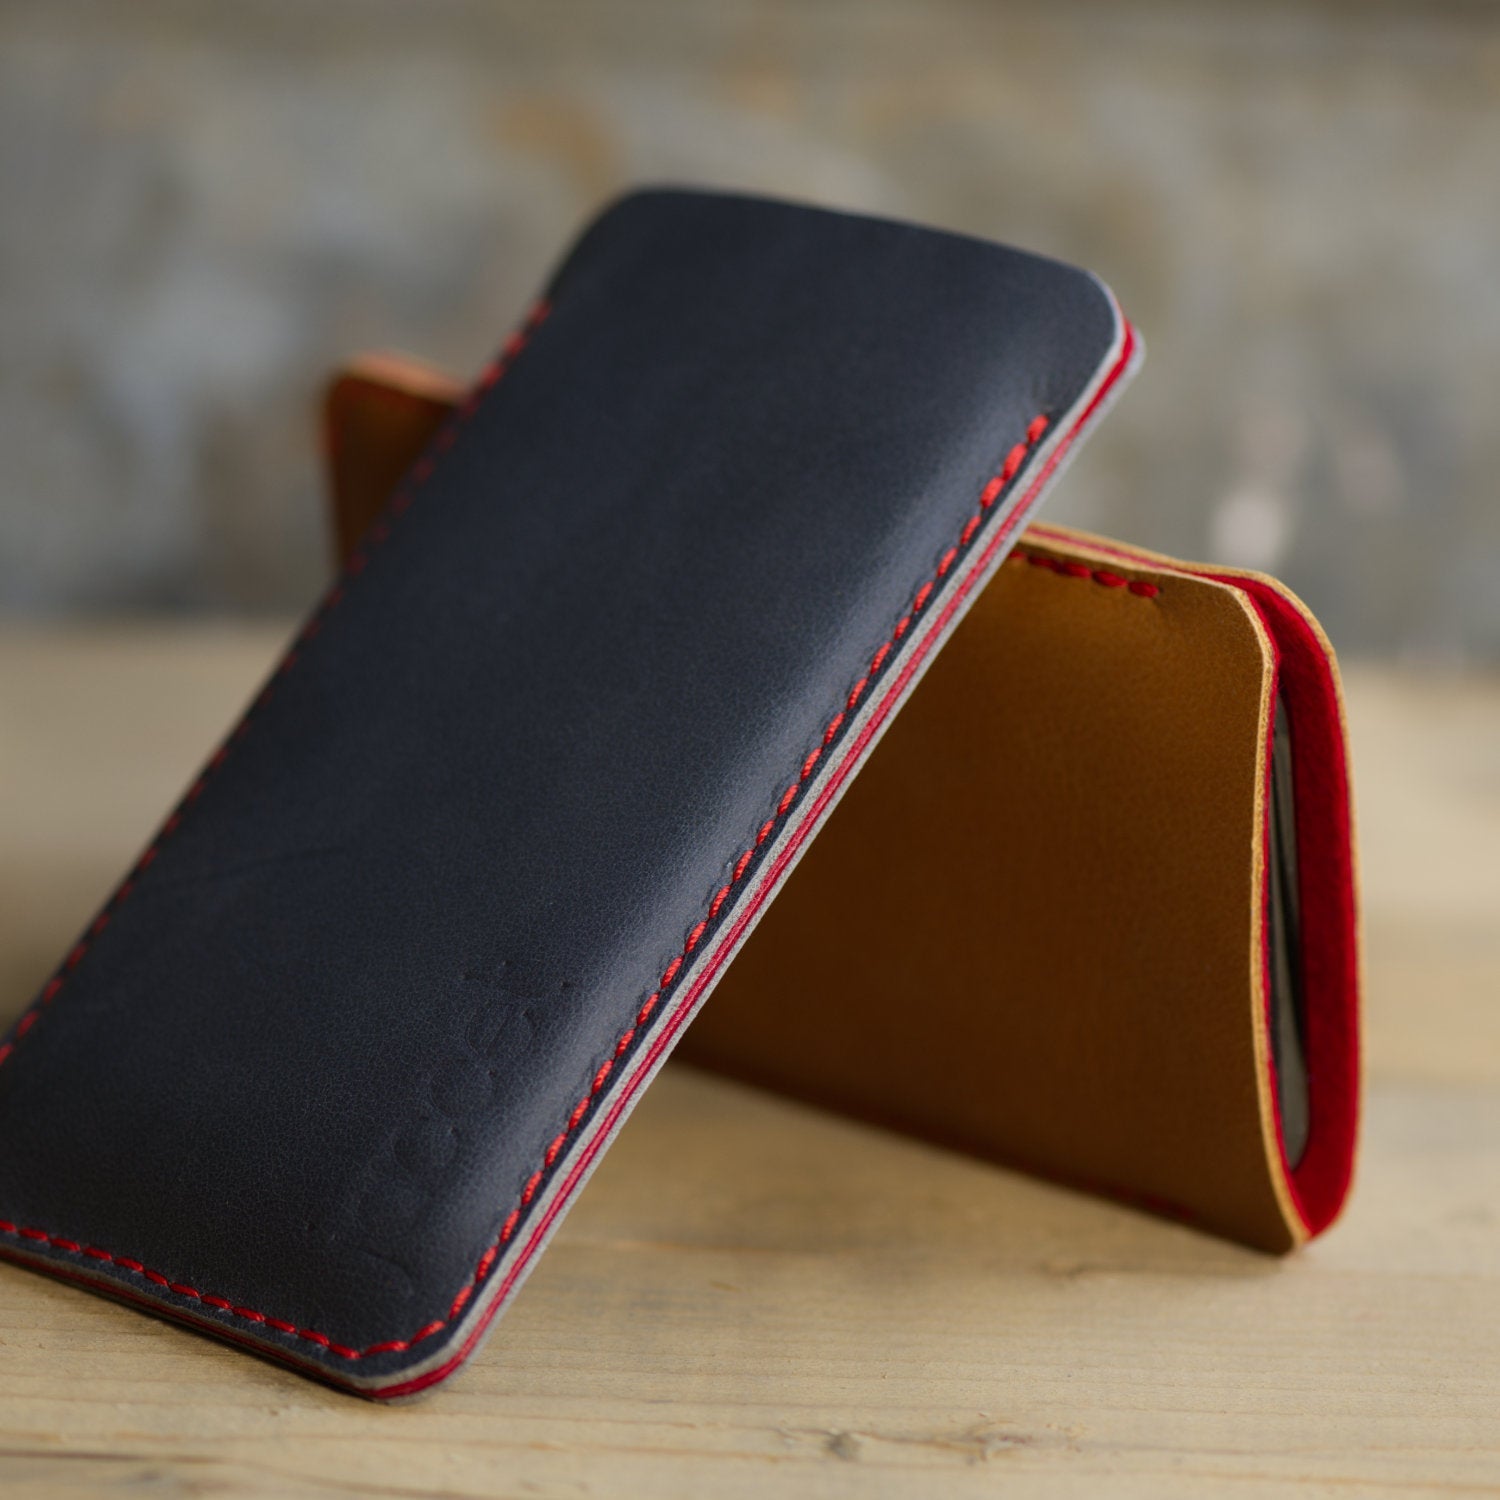 JACCET leather OPPO sleeve - anthracite/black leather with red wool felt. 100% Handmade